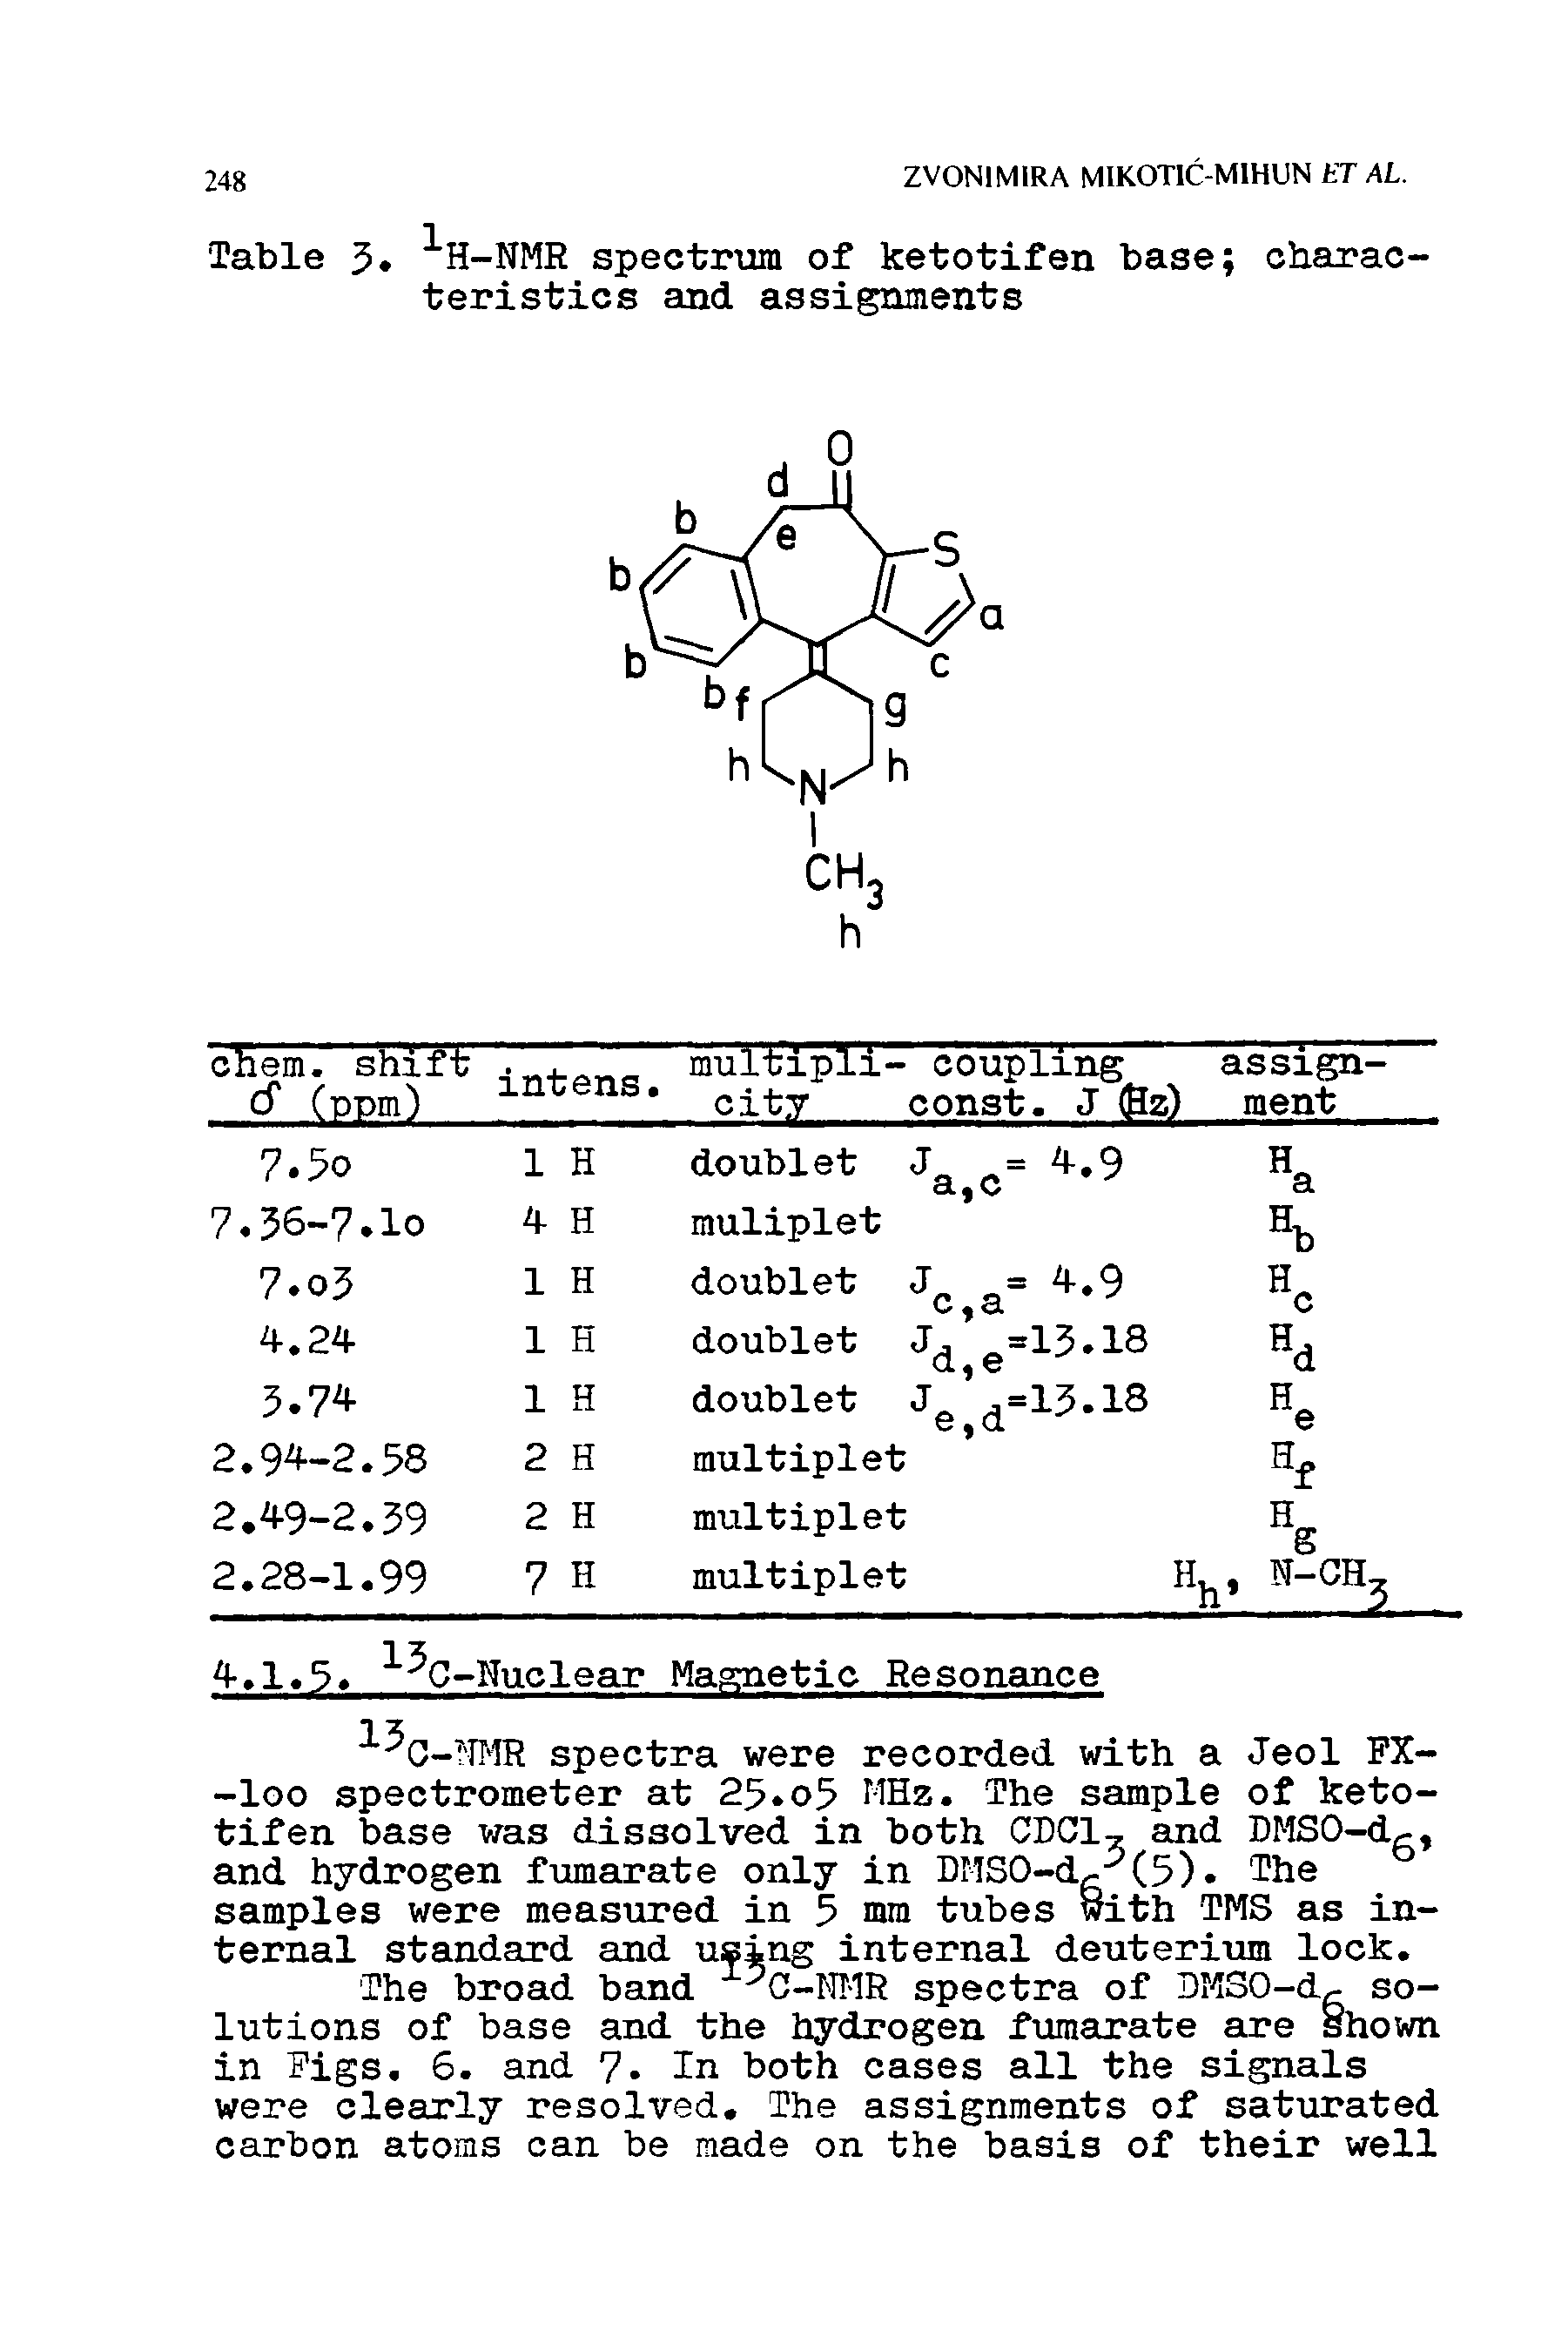 Table 3. 1H-NMR spectrum of ketotifen base characteristics and assignments...